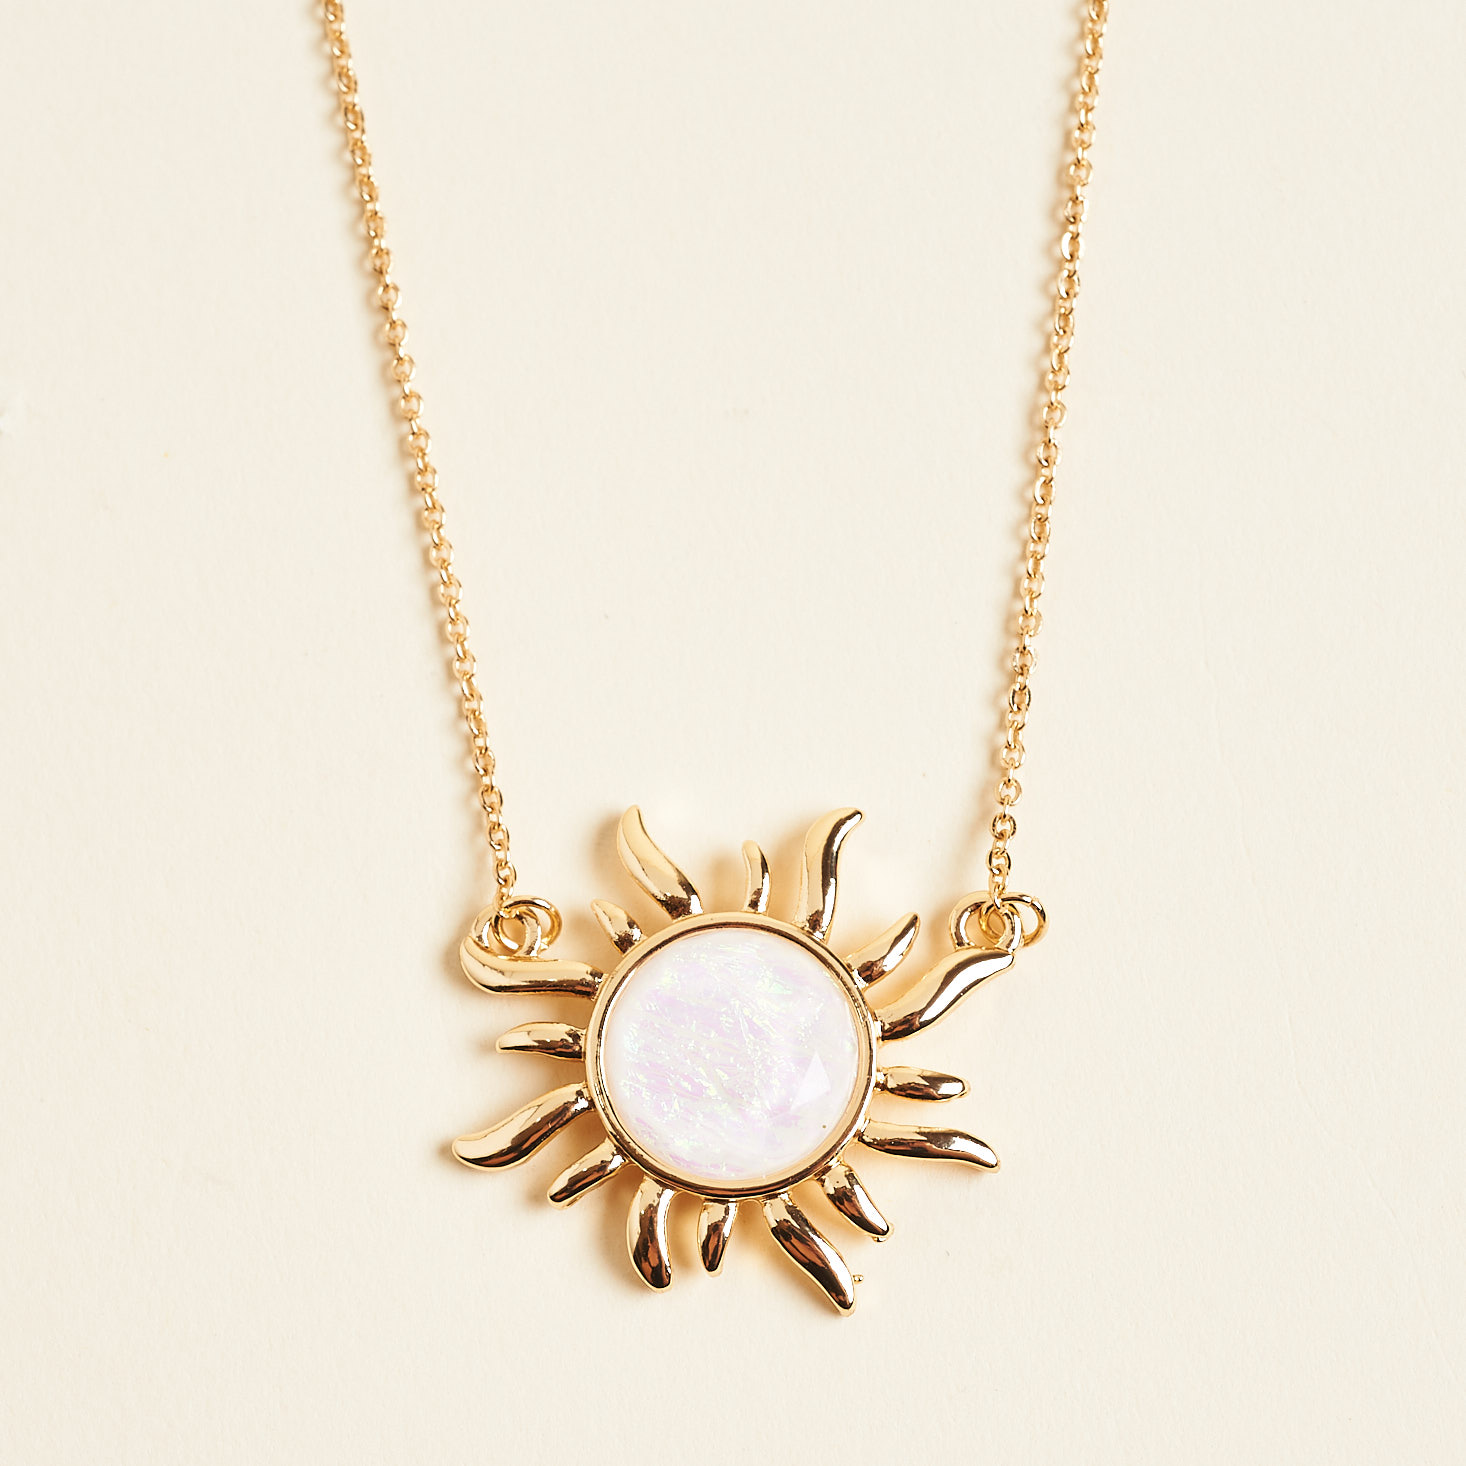 sun necklace with faux opal center